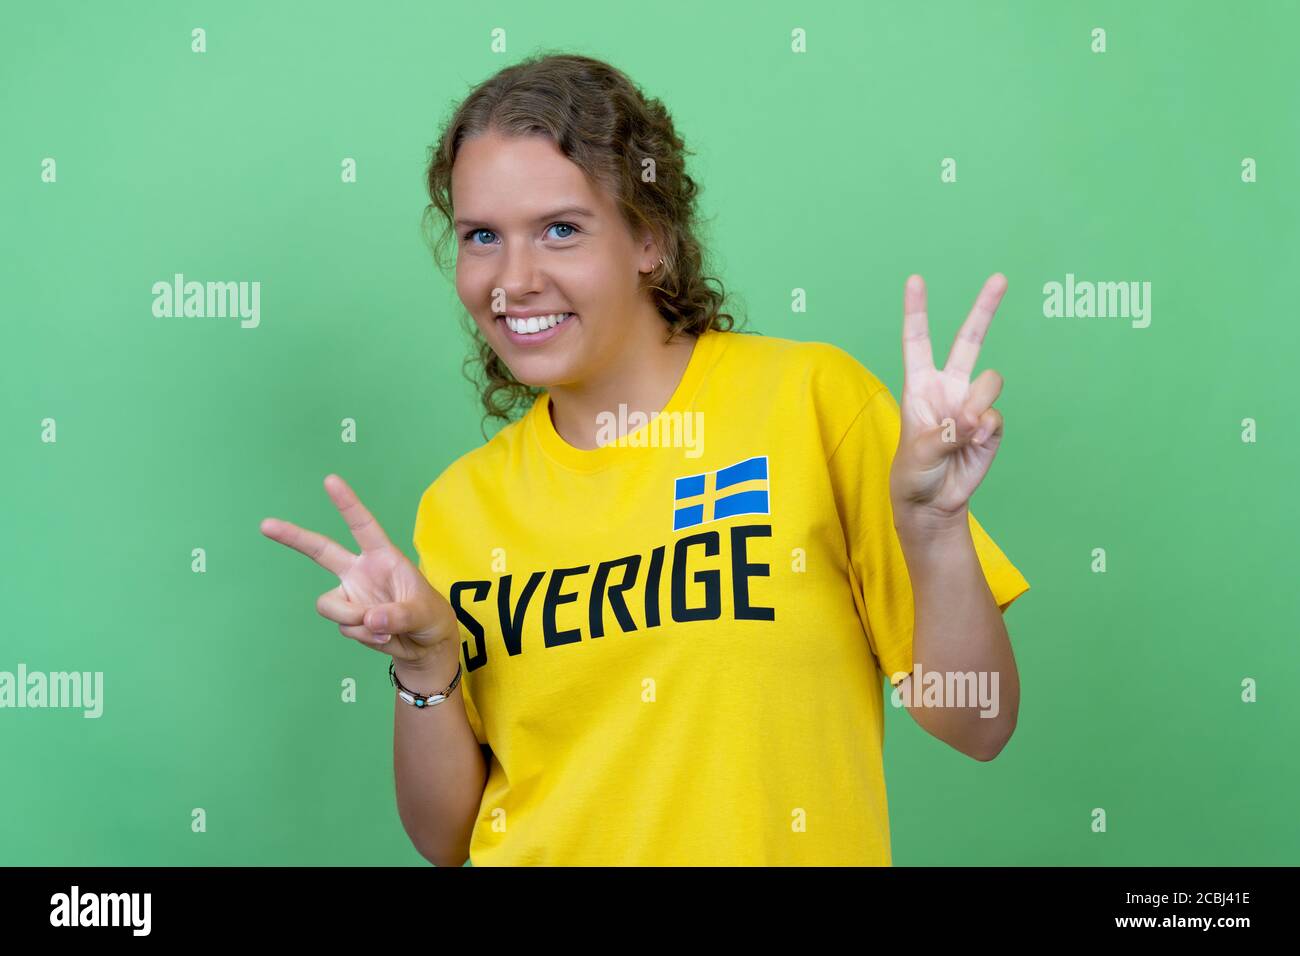 Blond female soccer fan from sweden isolated on green background Stock Photo